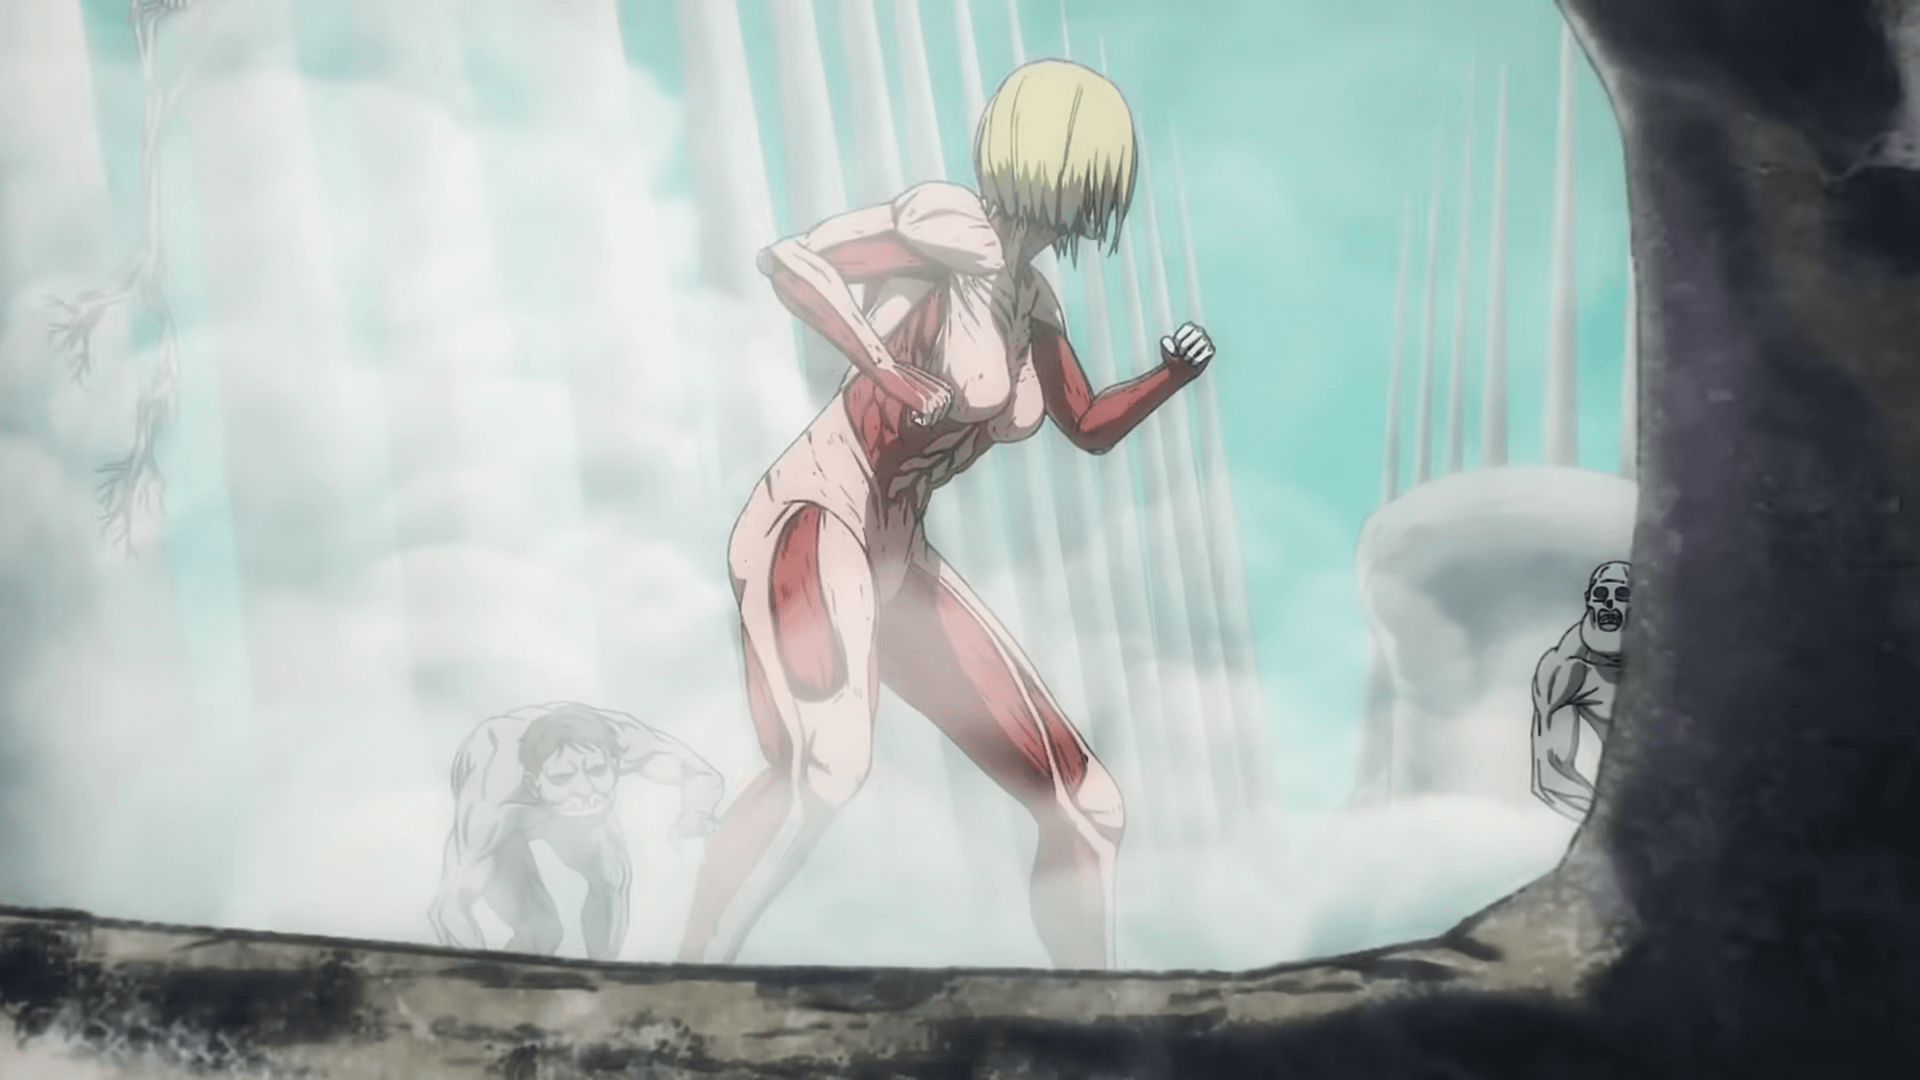 Attack On Titan Final Season The Final Chapters Special 2 – Final Trailer